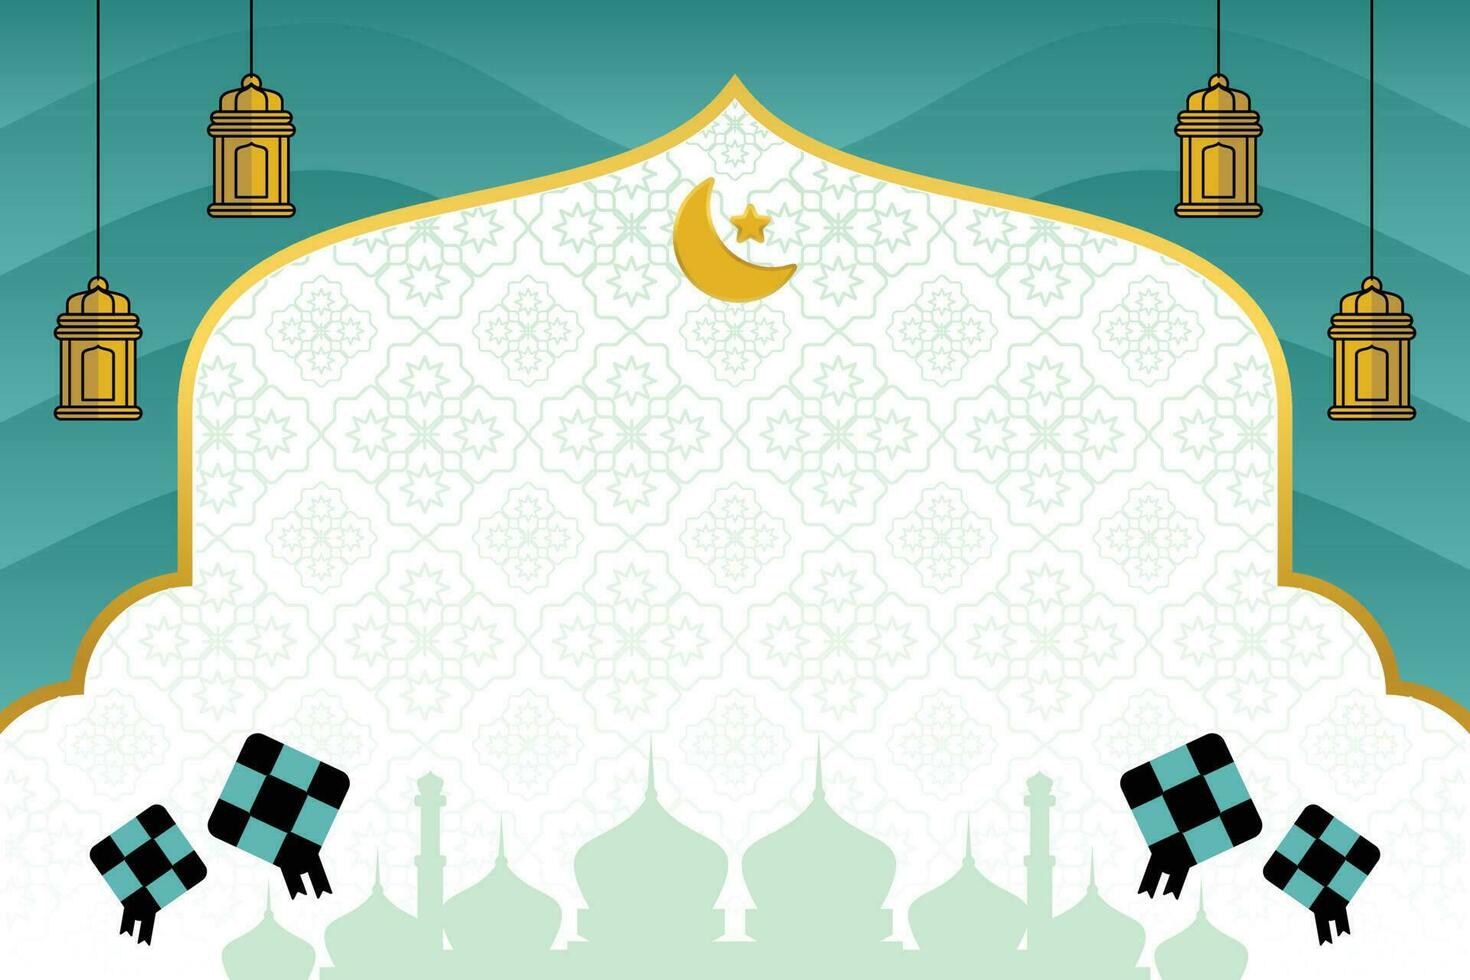 Editable Eid sale banner template. with diamond ornaments, moon, stars, lanterns and the silhouette of a mosque. Design for social media, poster, greeting card,web. Islamic vector illustration